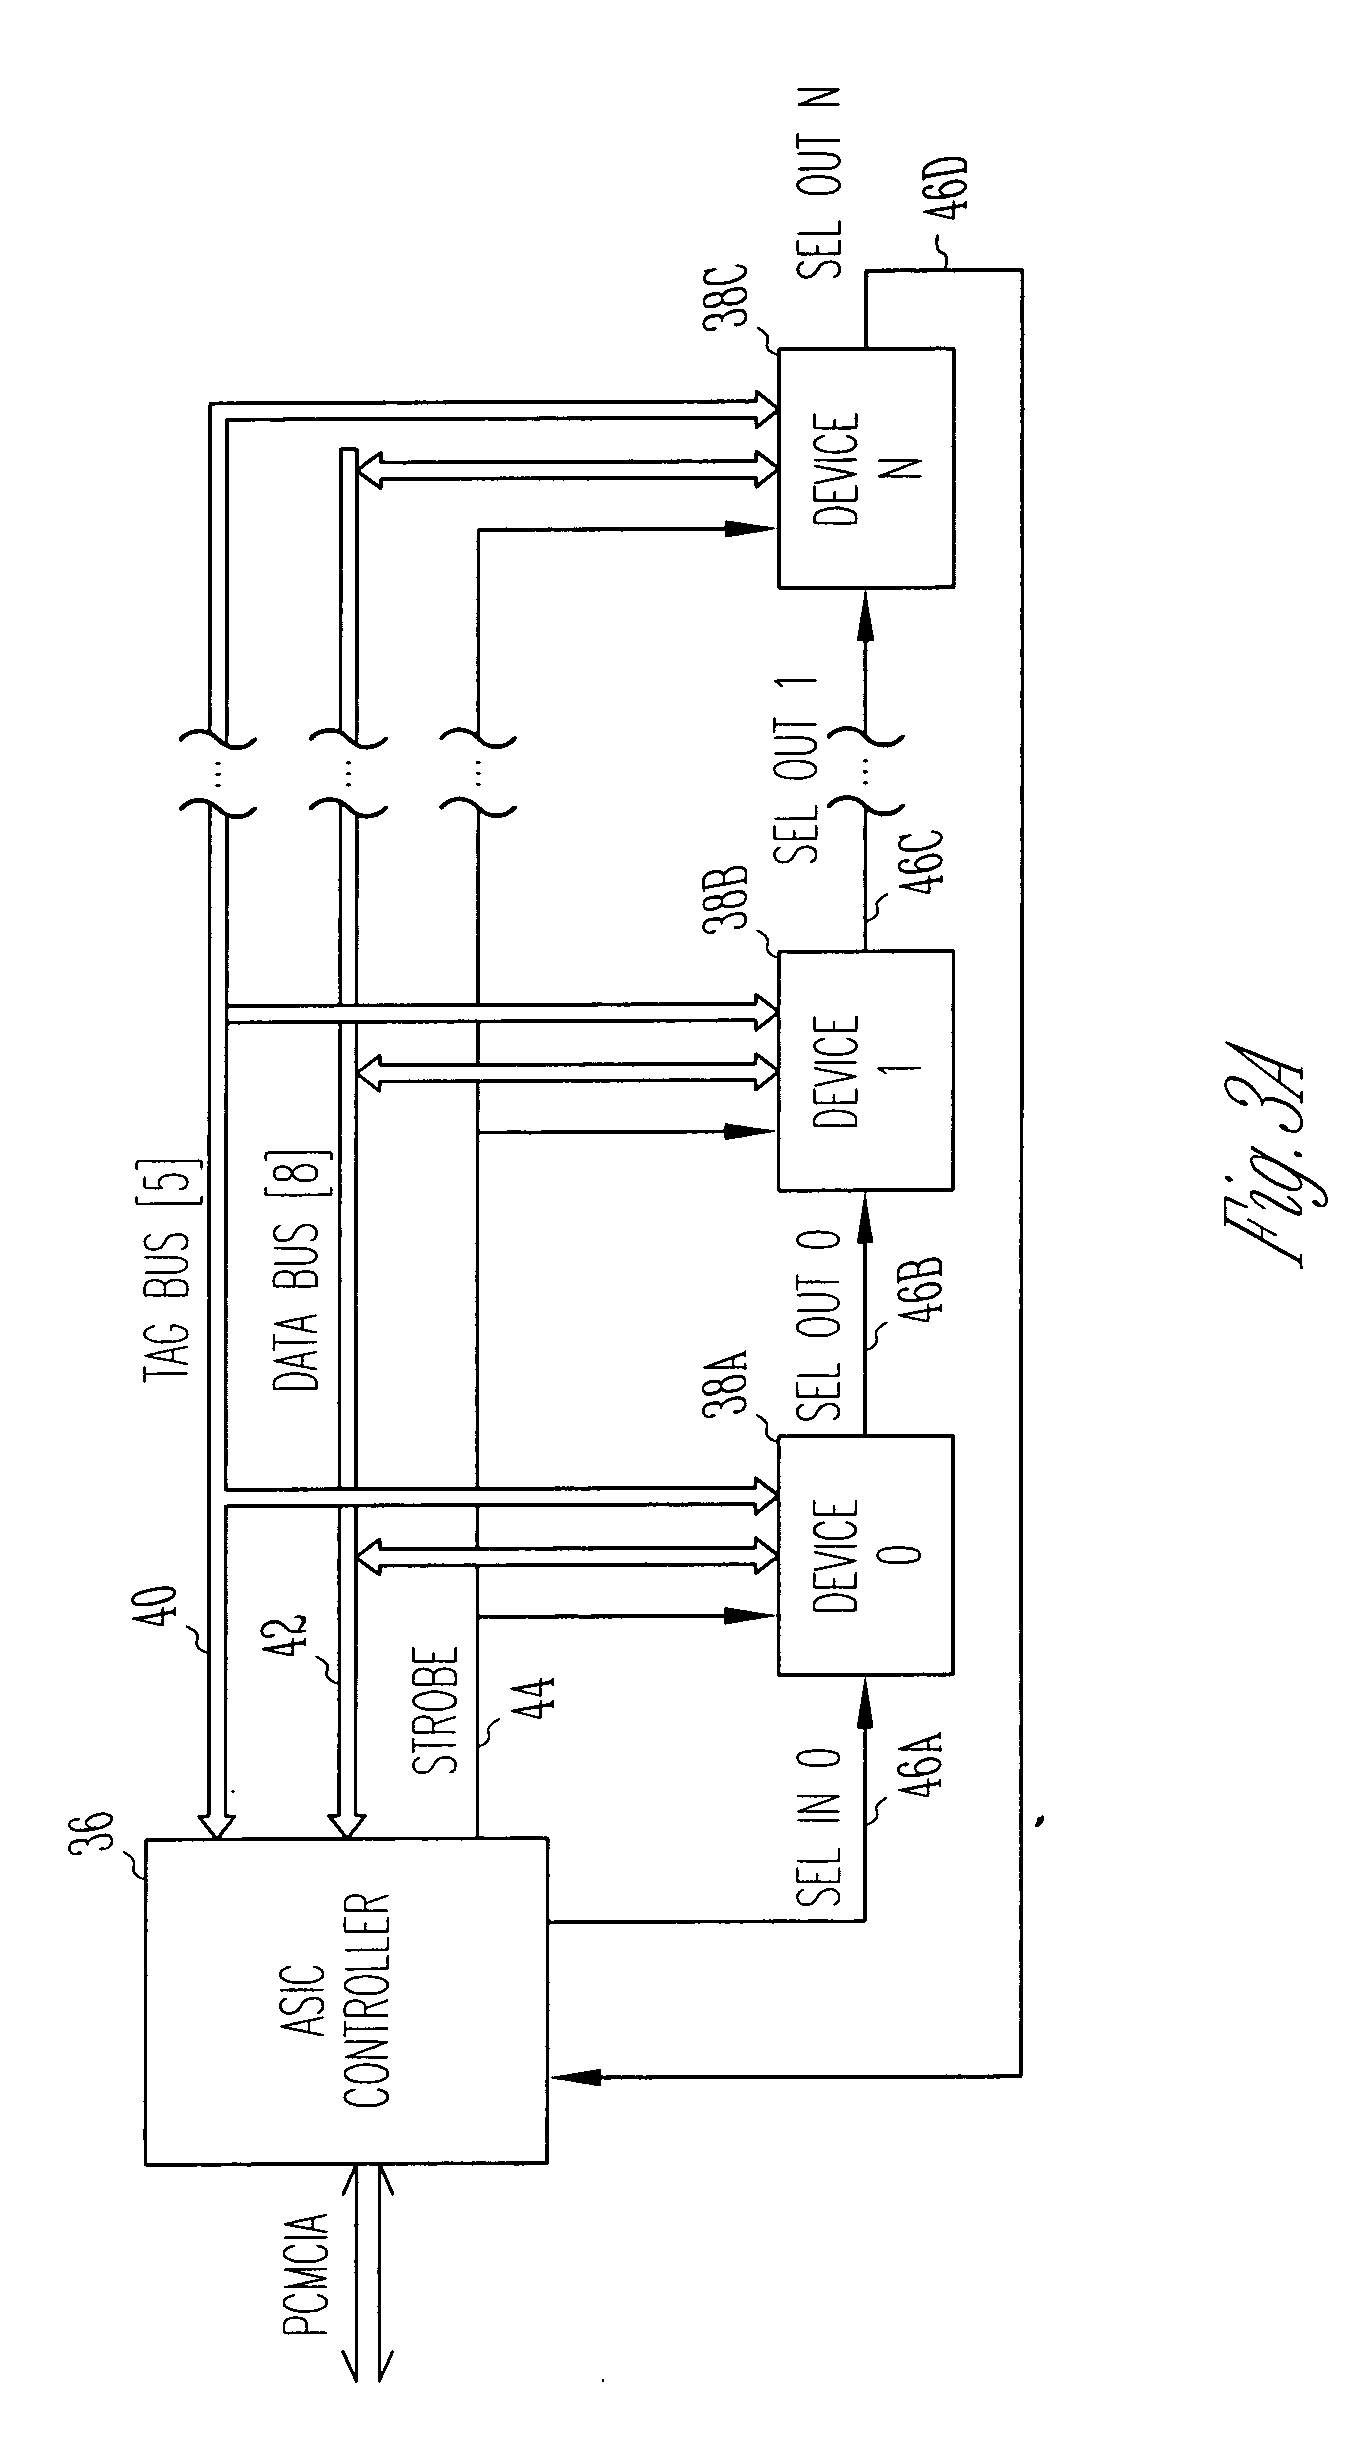 Memory system and method for assigning addresses to memory devices